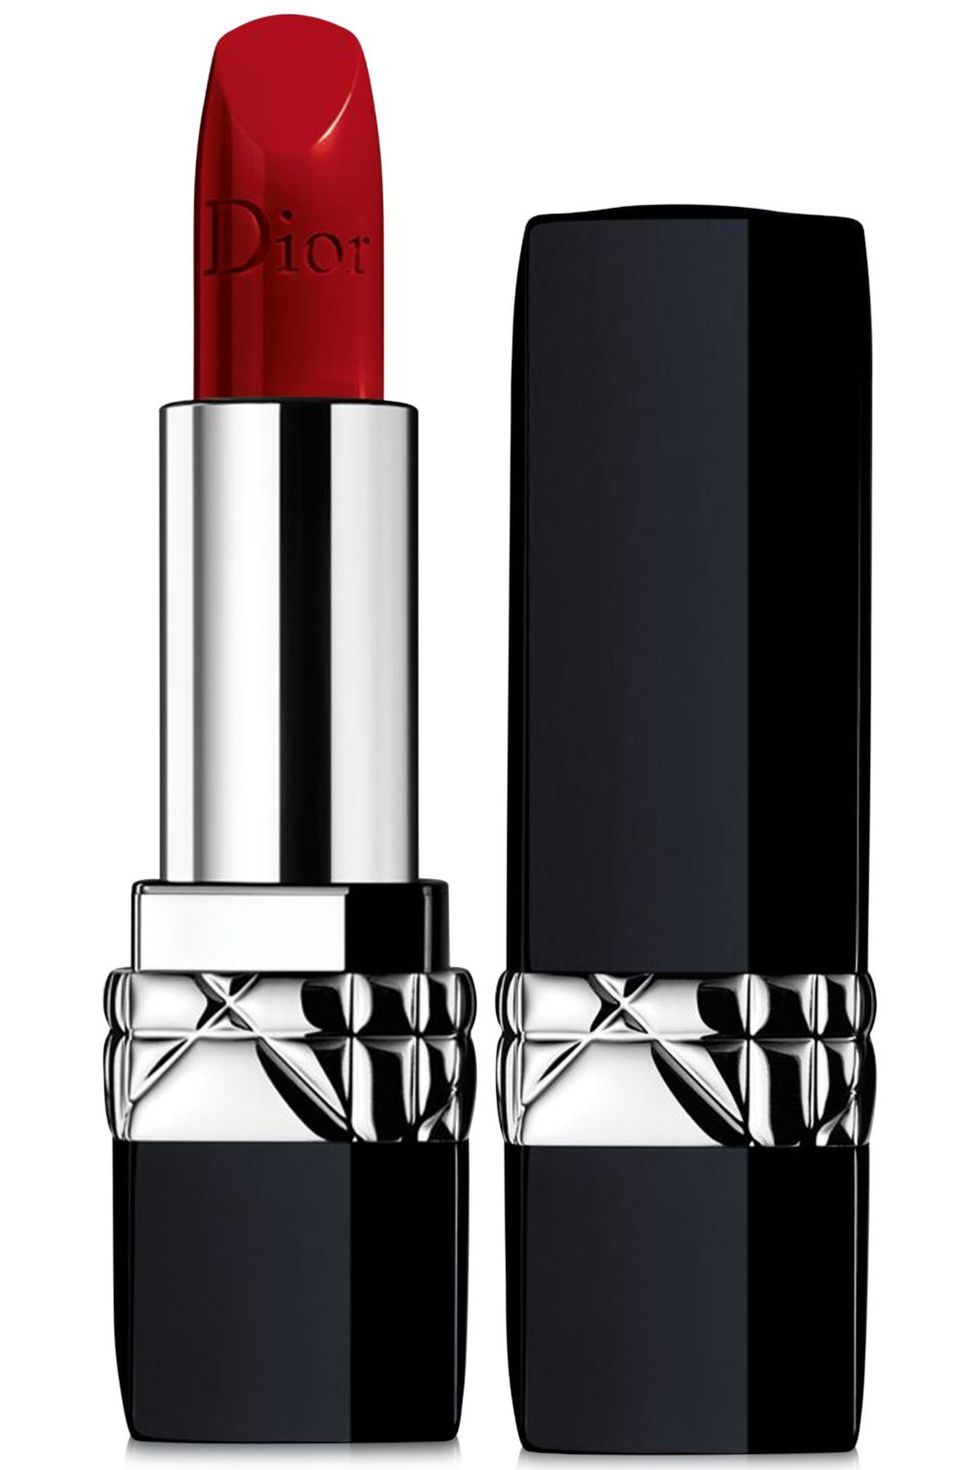 Rouge Hermes Shiny Lipstick Review - The Beauty Look Book